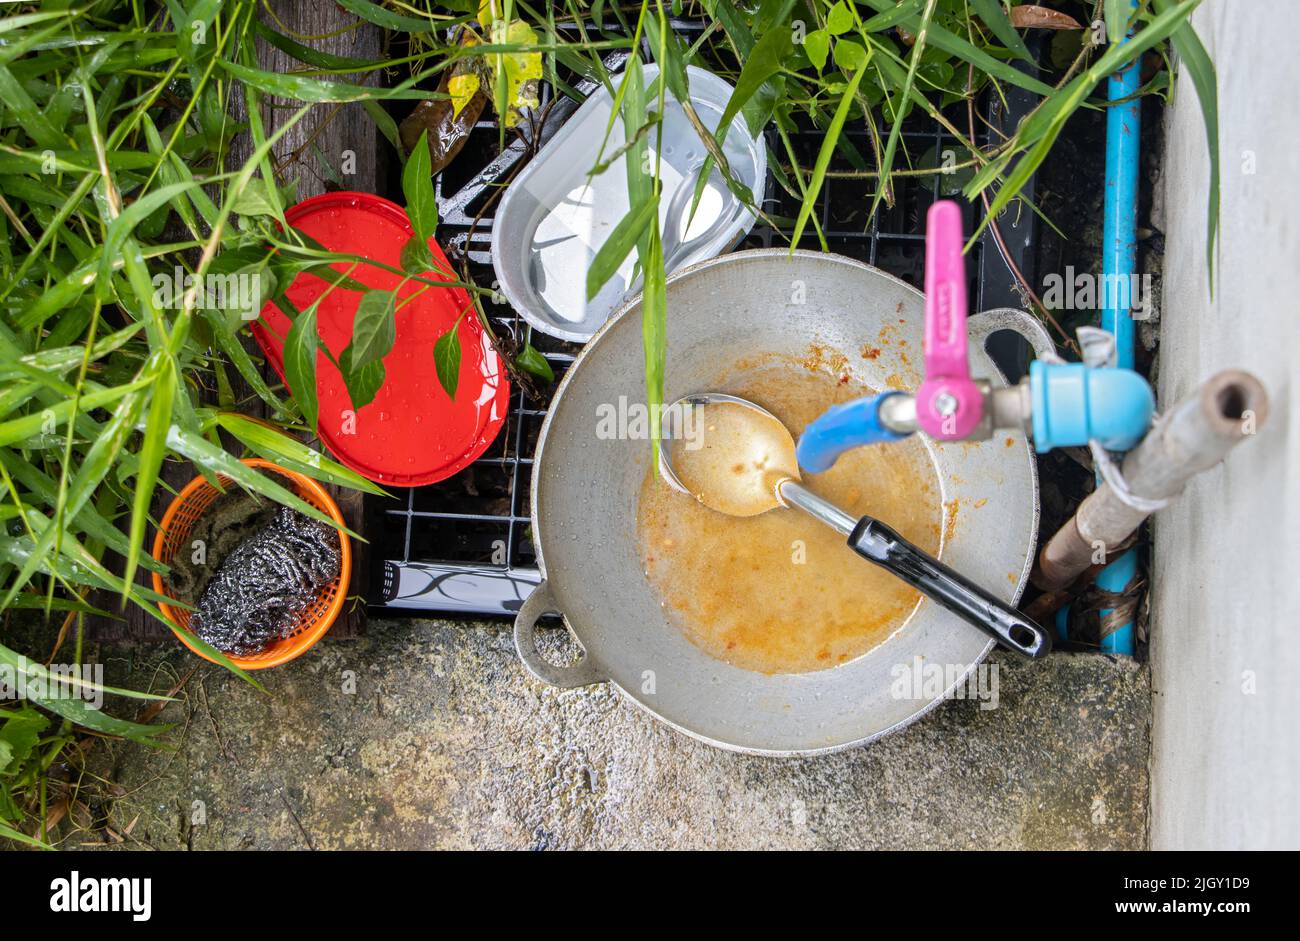 An unwashed dishes under the pipe with tap in the rural backyard Stock Photo